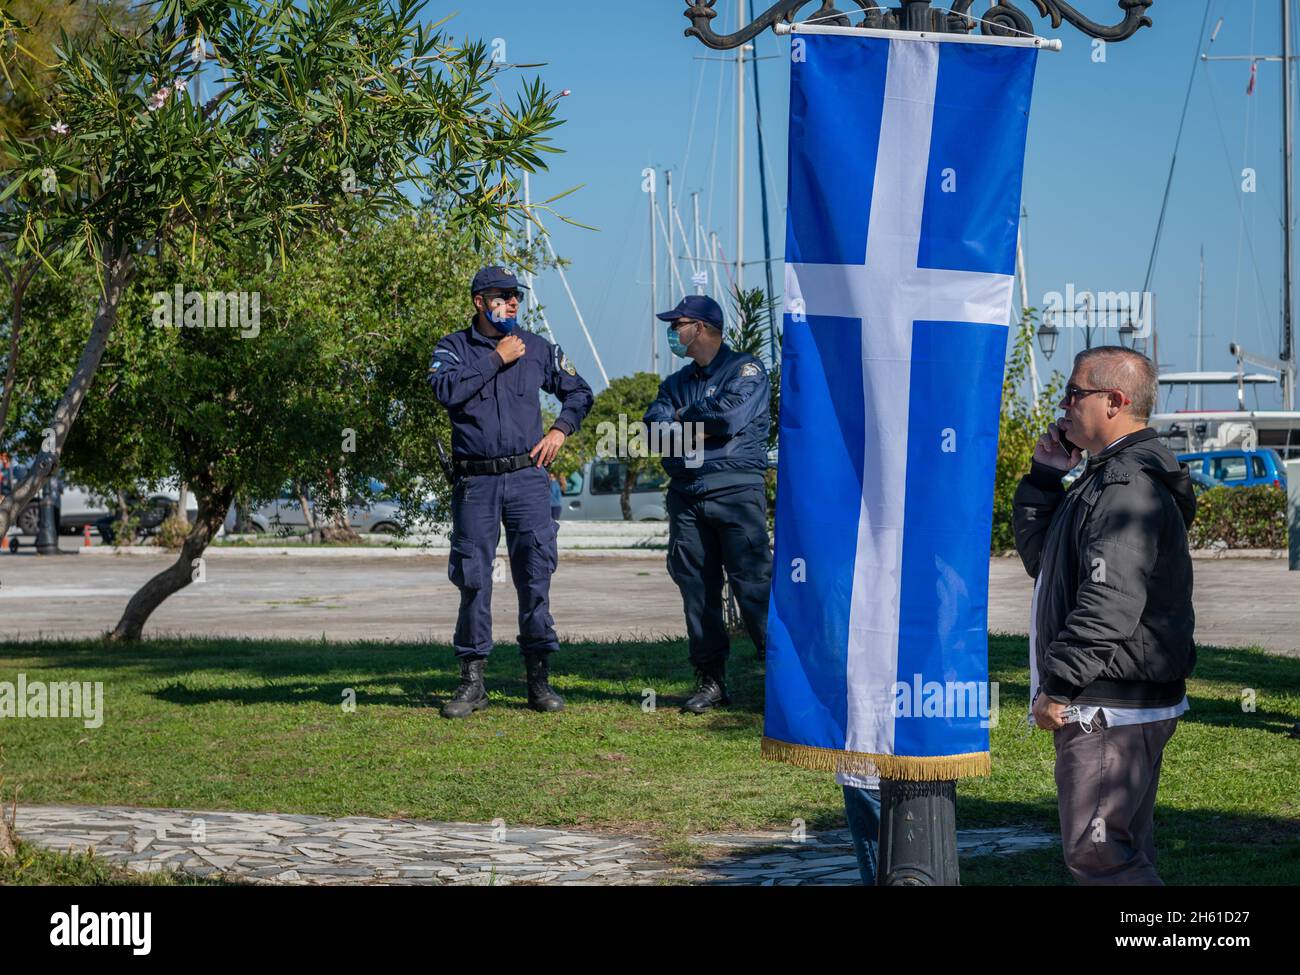 Lefkada. Greece. 10.28.2021. Police and security officers at work during the Greek Oxi day anniversary celebration. Stock Photo